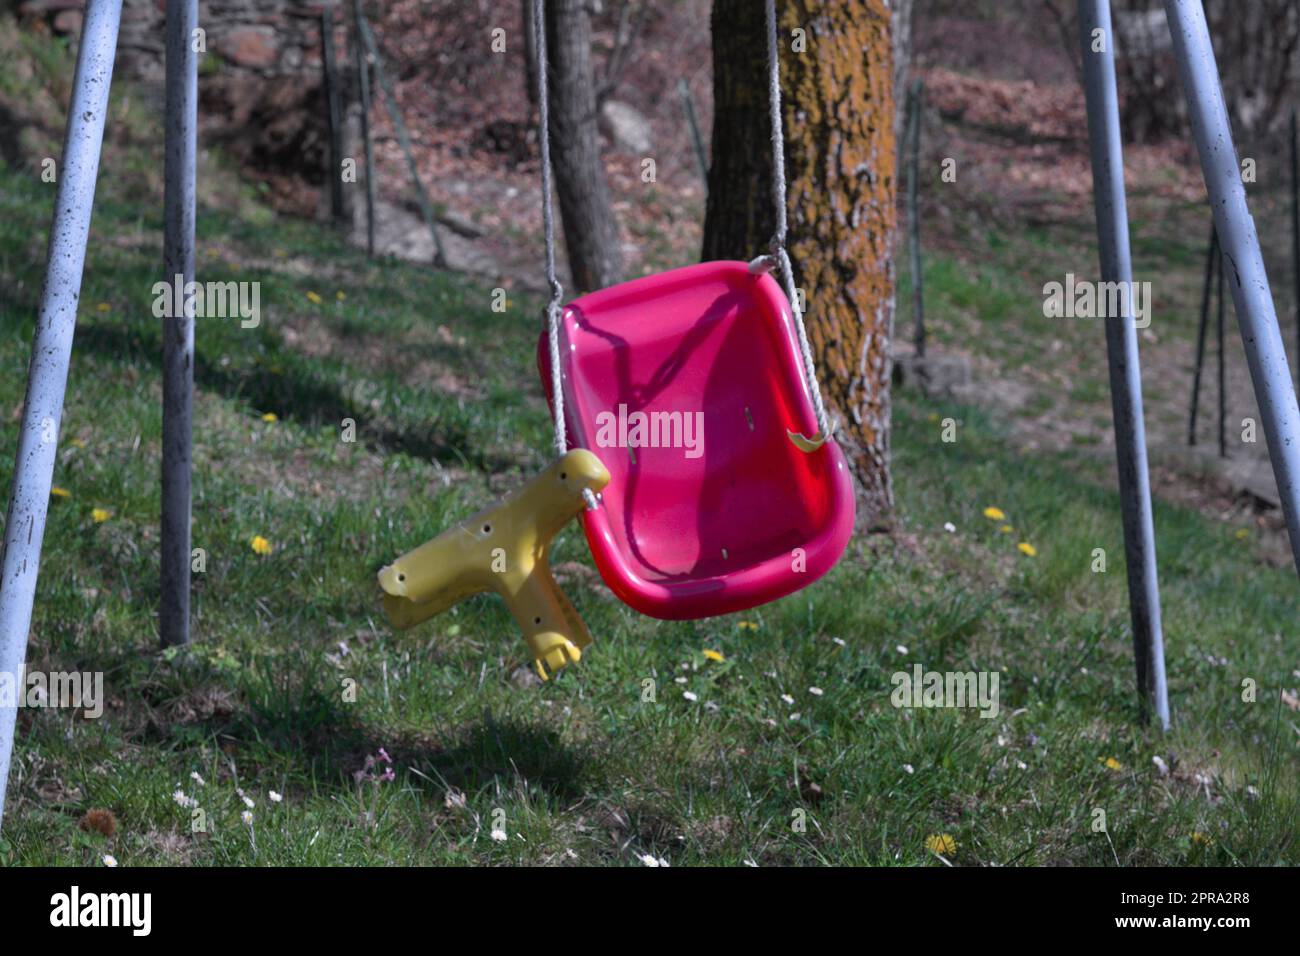 Broken swing on an abandoned playground with purple-yellow seat. The seat is broken. Grass and a tree are visible in the background. Stock Photo